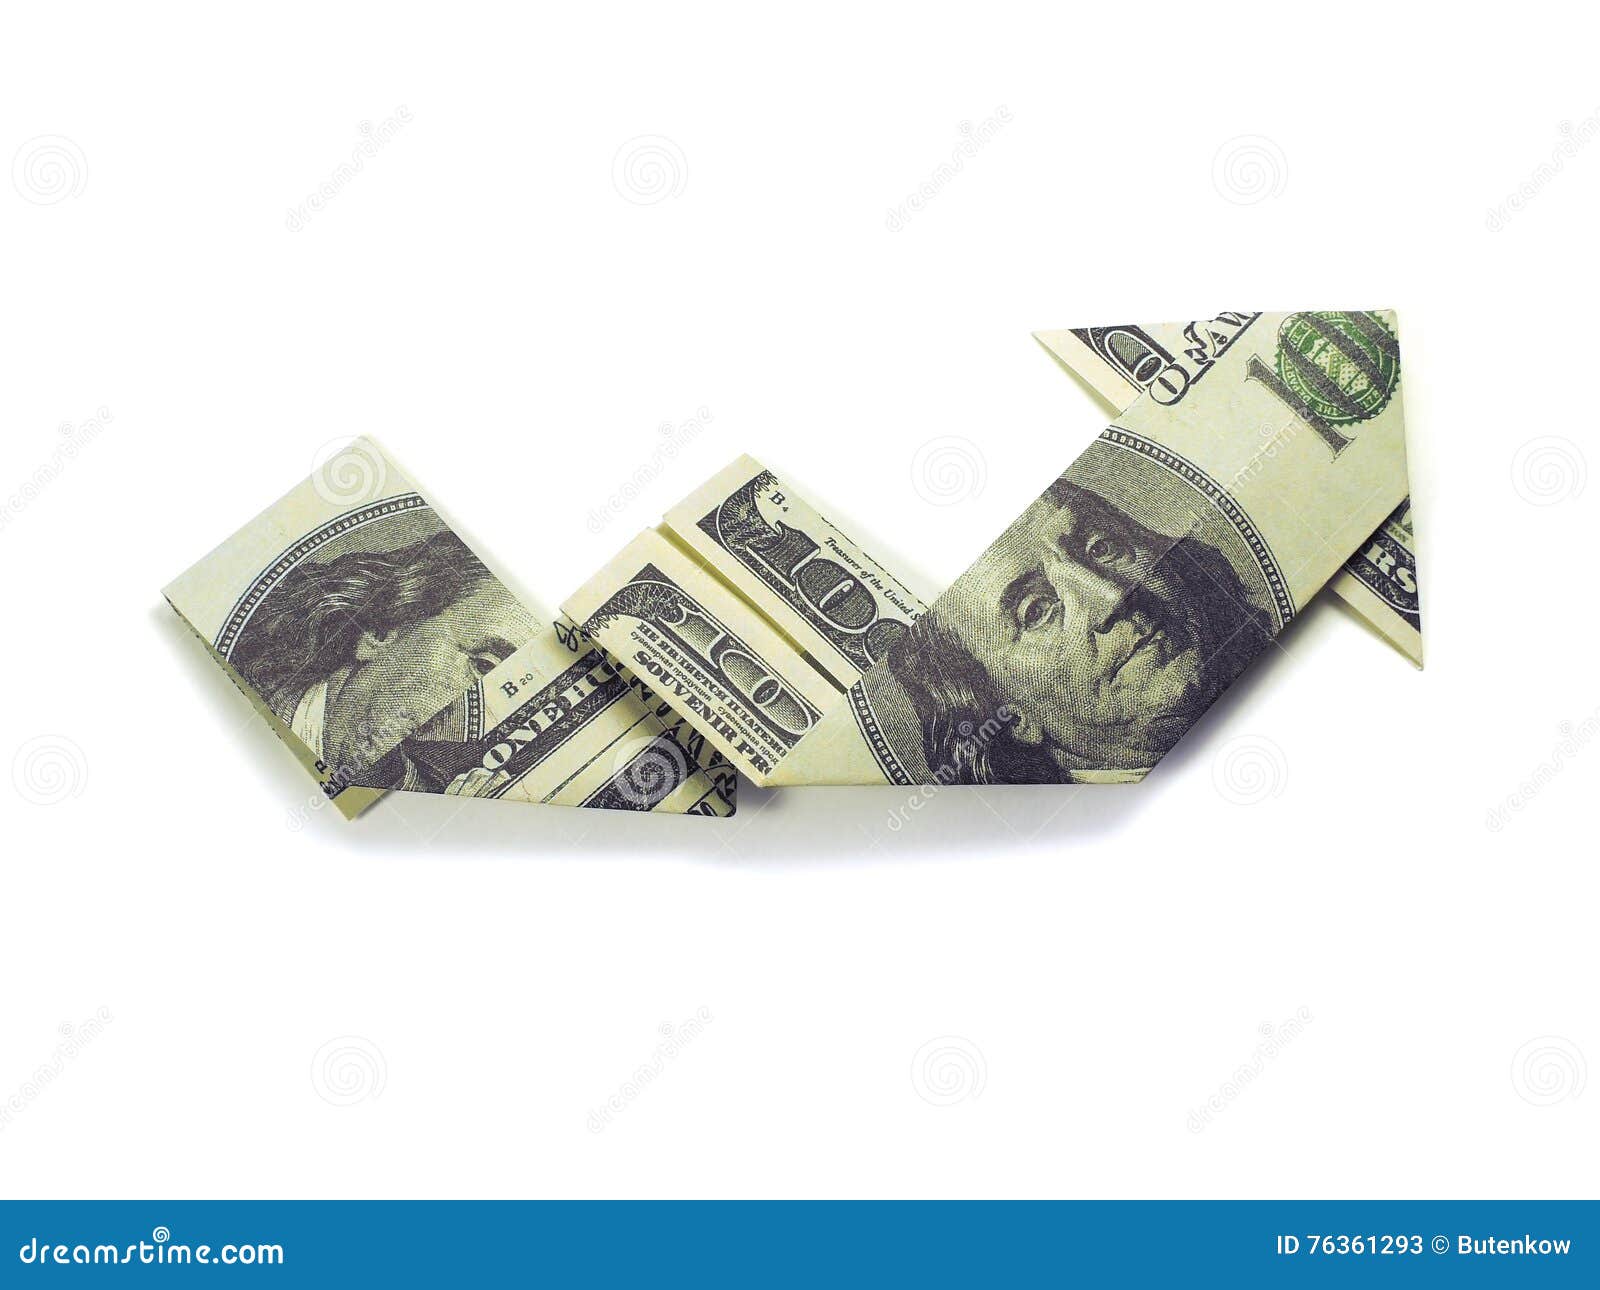 Dollars arrow origami stock image. Image of idea, currency - 76361293